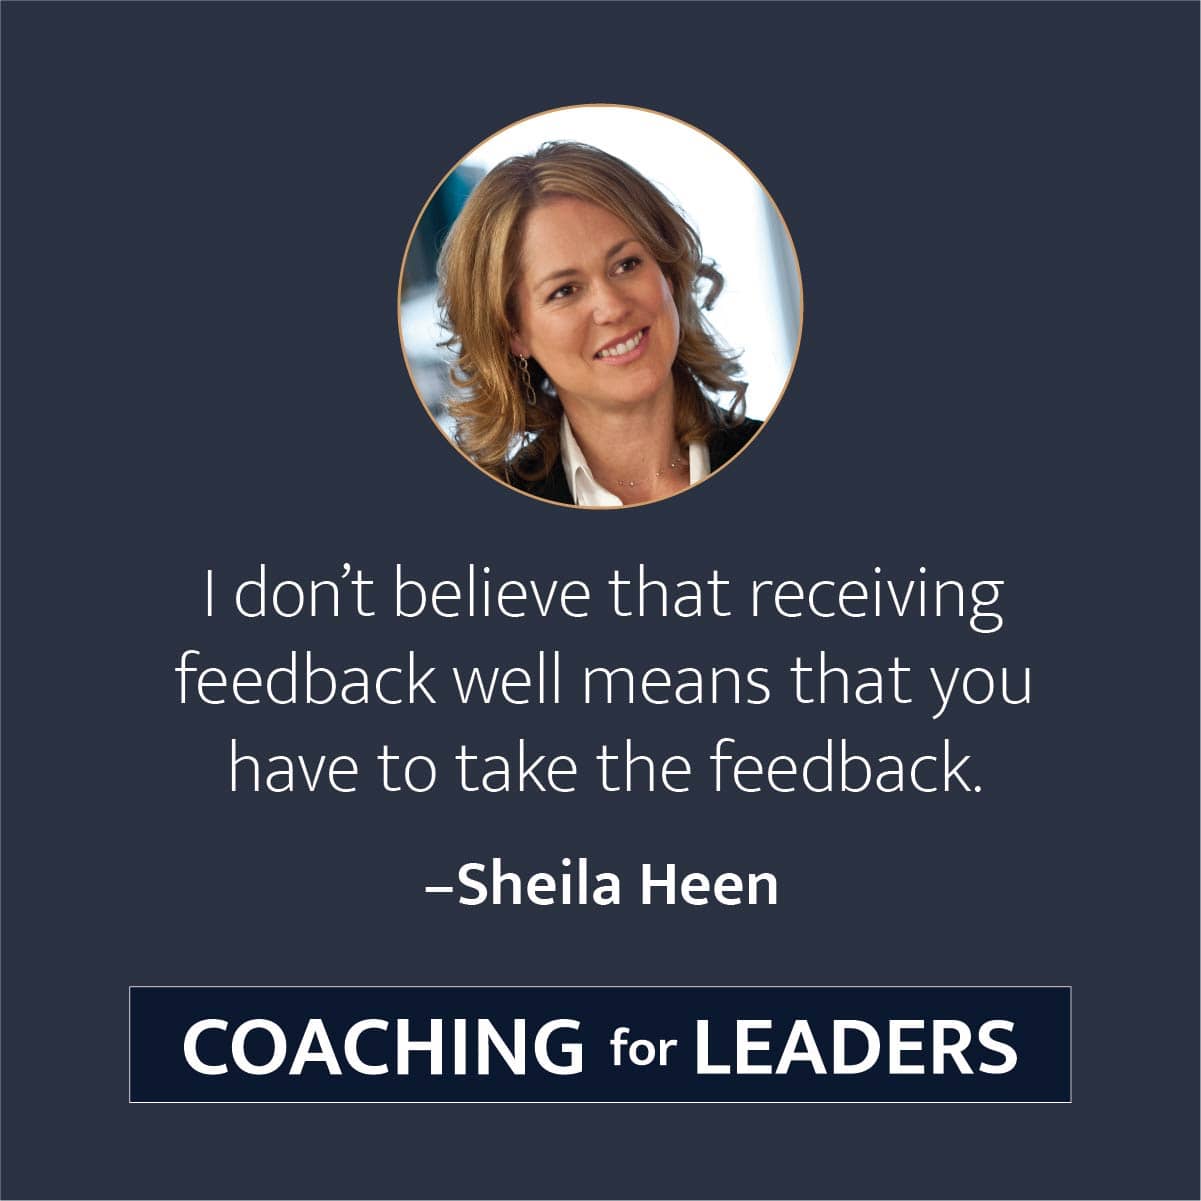 I don't believe that receiving feedback well means that you have to take the feedback.